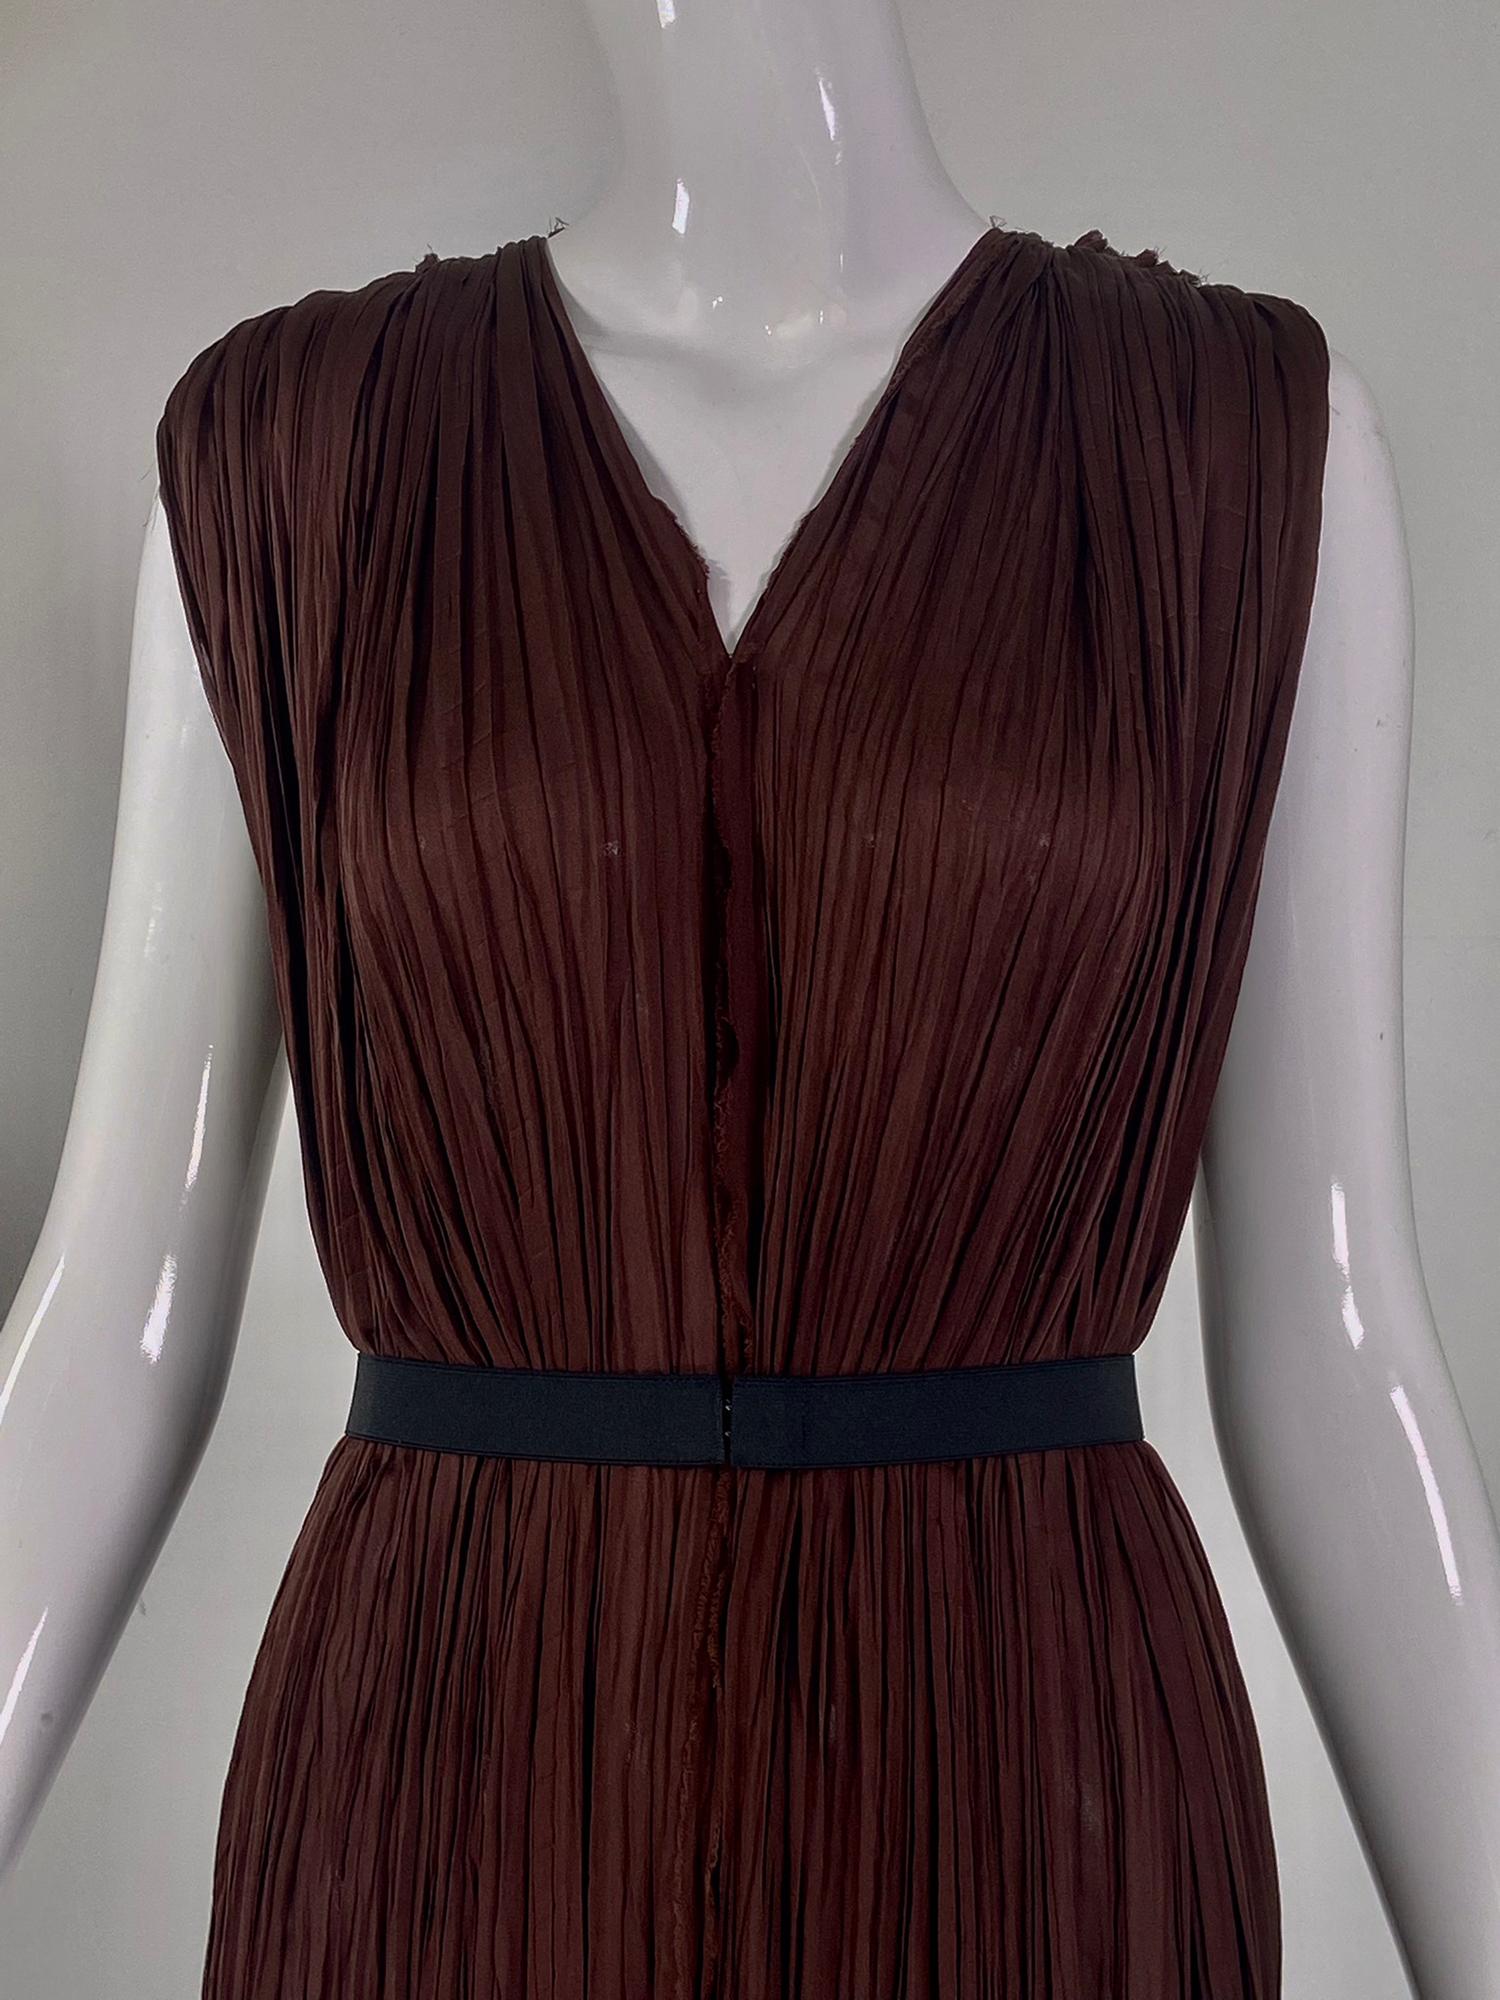 Lanvin Ete' 2005 Fortuny Pleated V Neck Maxi Dress Chocolate Brown Alber Elbaz 5